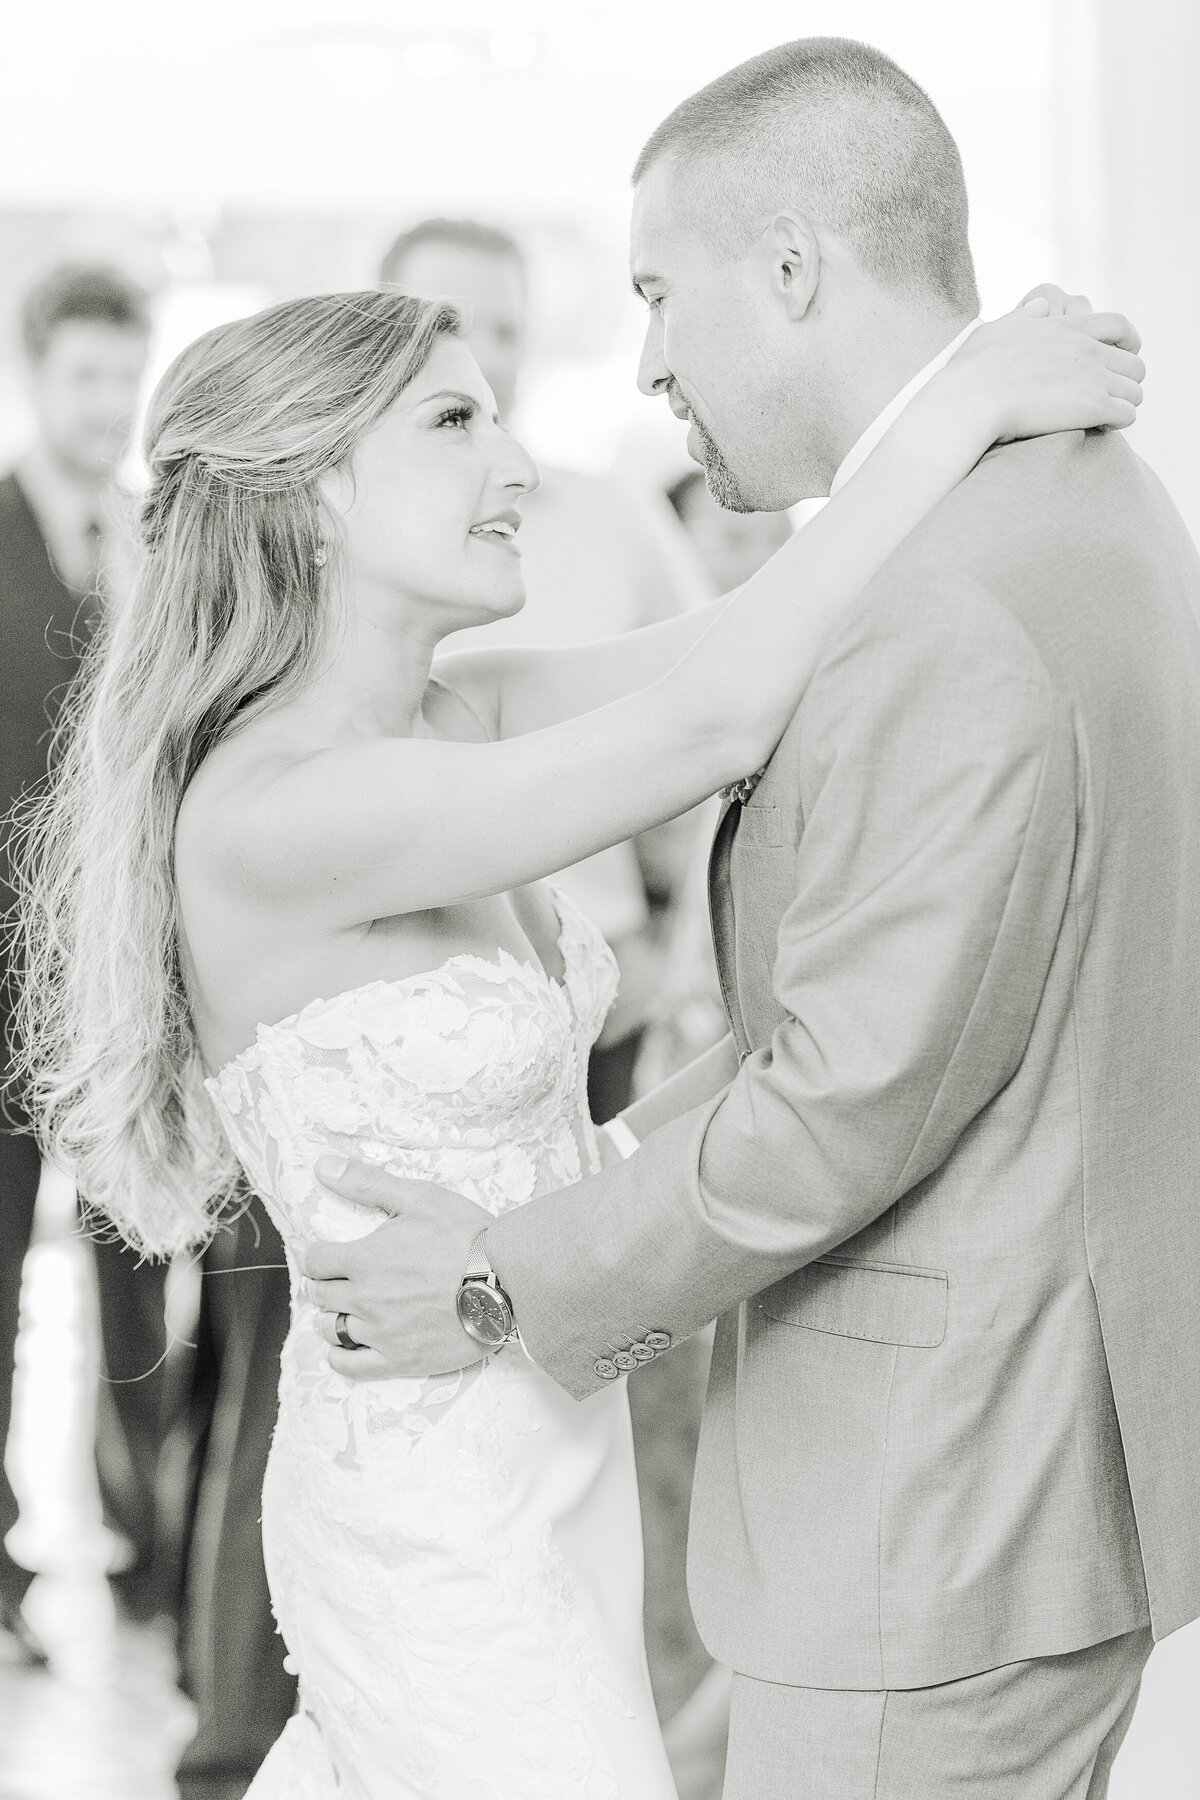 Bride and groom share a dance at their Five Bridge Inn Wedding Reception. Close up image. Bride's arms are draped around her groom's neck. They are looking and smiling at each other. Captured by MA wedding photographer Lia Rose Weddings